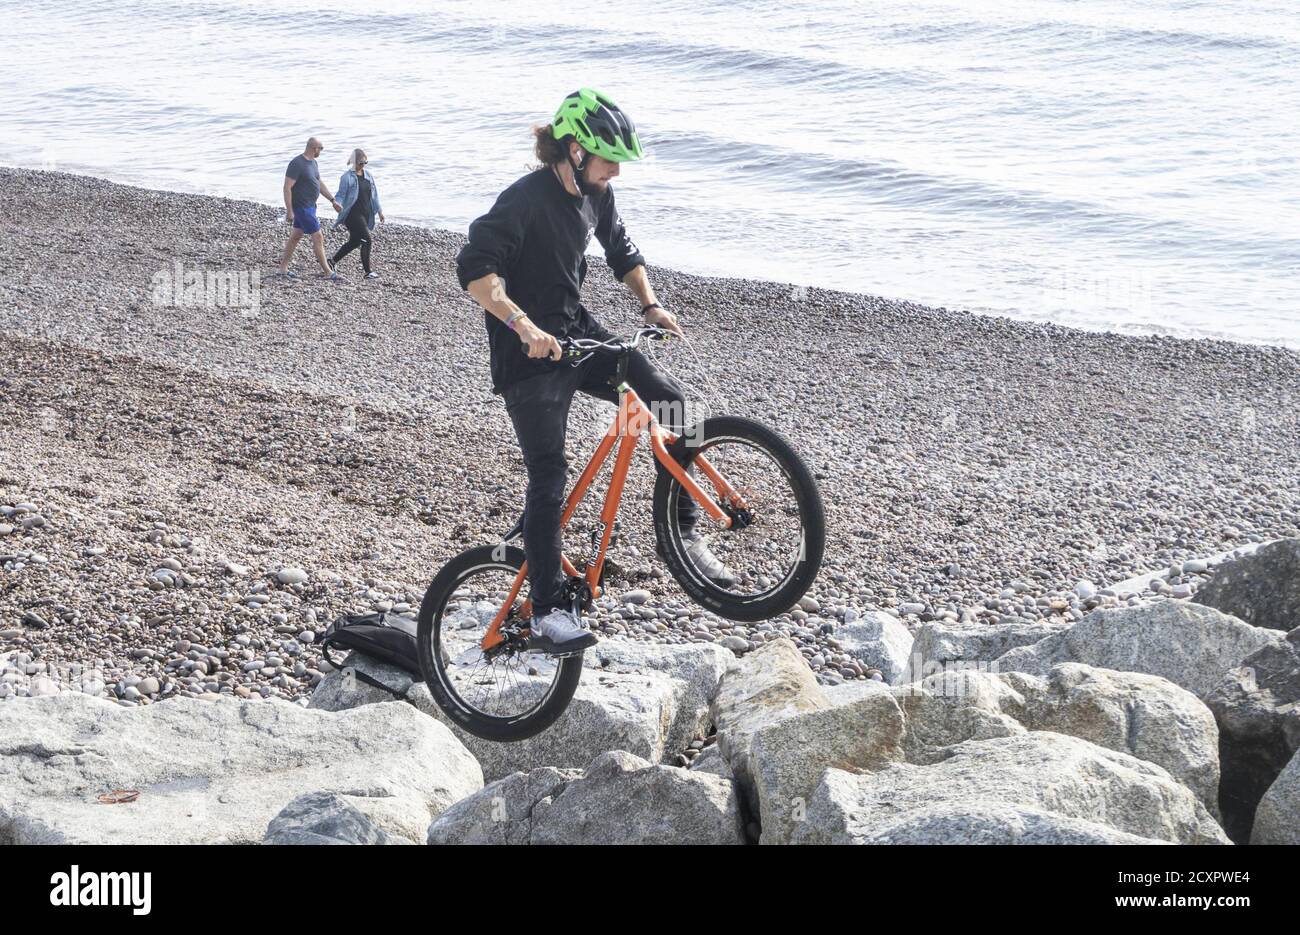 Sidmouth, Devon, 1st October 2020. A trials cyclist tests out his skills on the rock groynes at Sidmouth Devon as October begins on a bright and sunny day. Credit: Photo Central/Alamy Live News Stock Photo